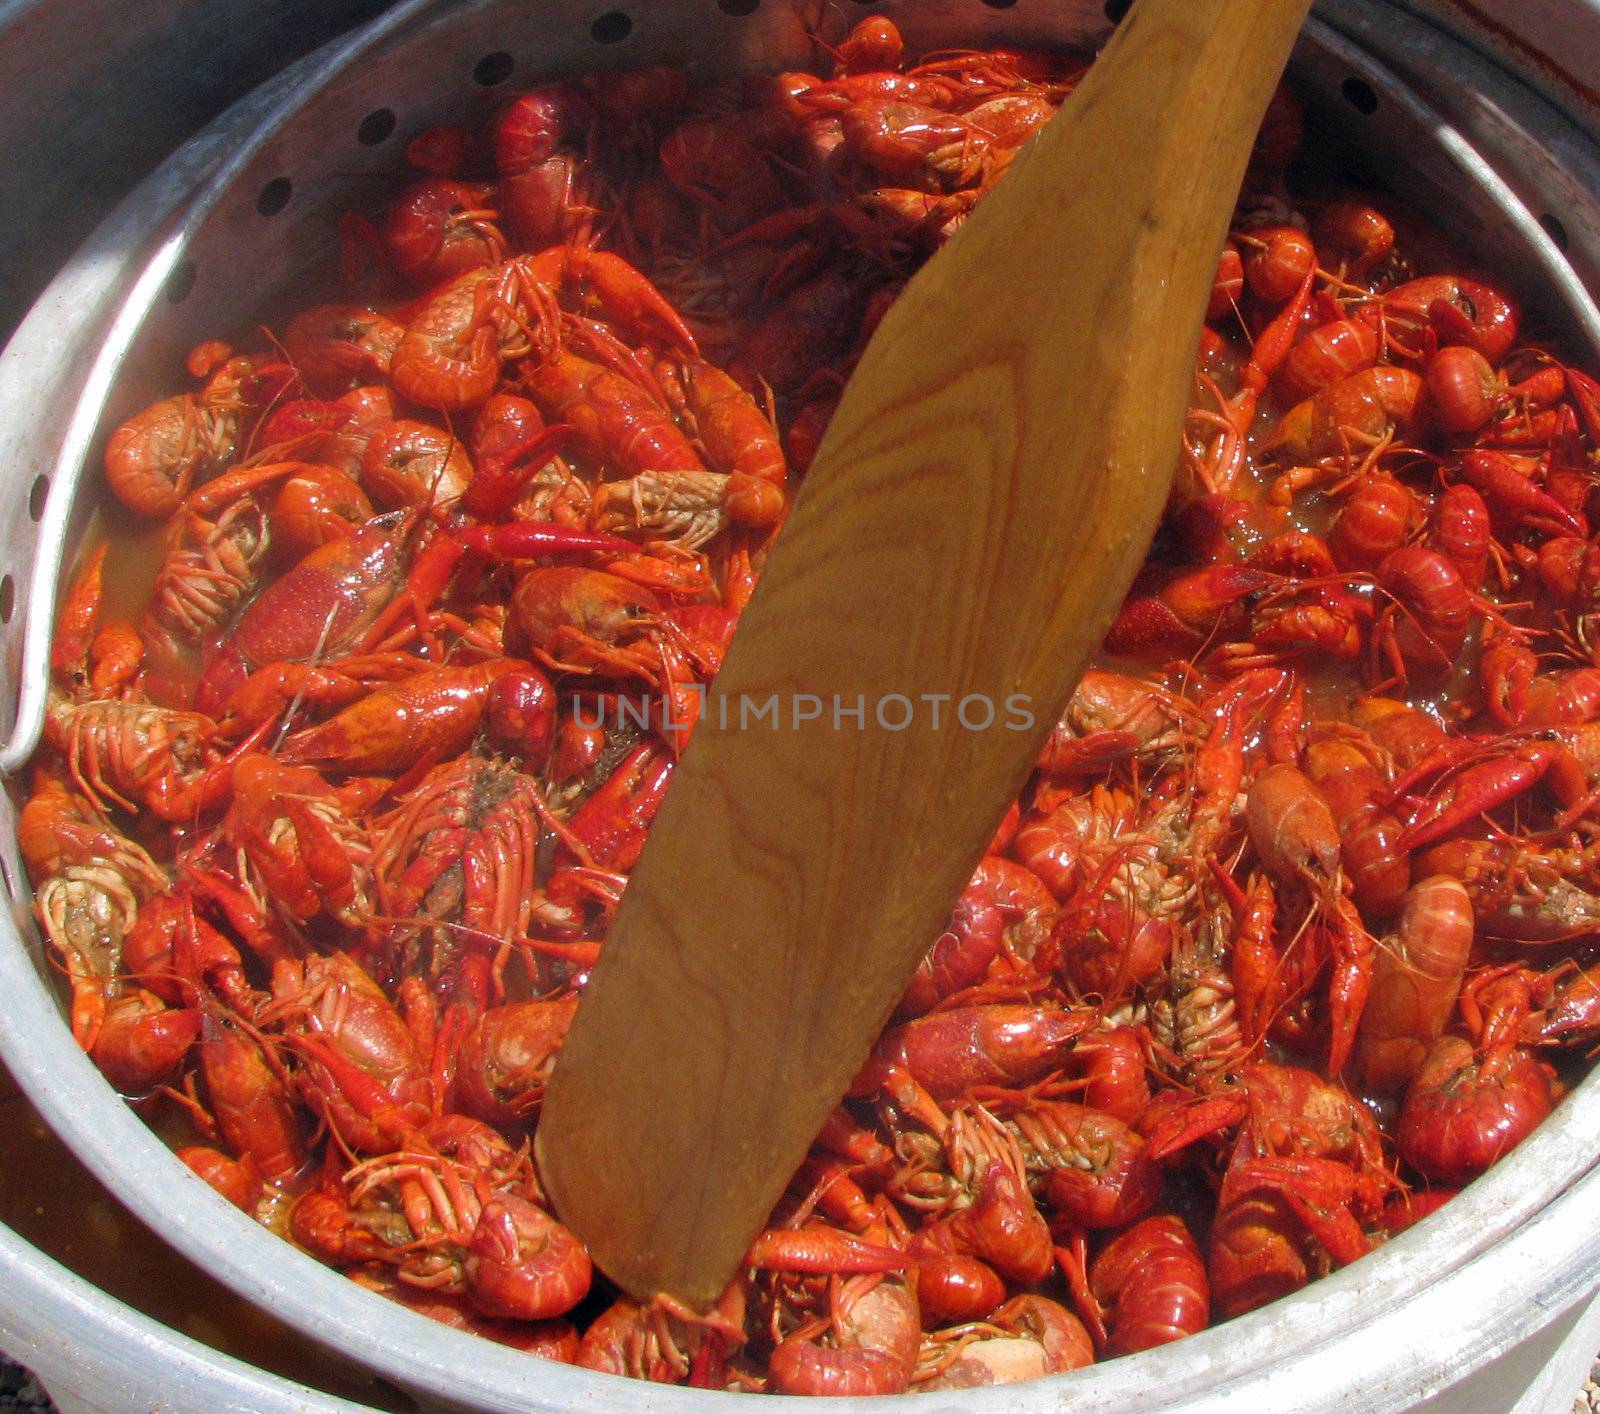 Crawfish being stirred with a boat paddle with being cooked on an outdoor cooker.